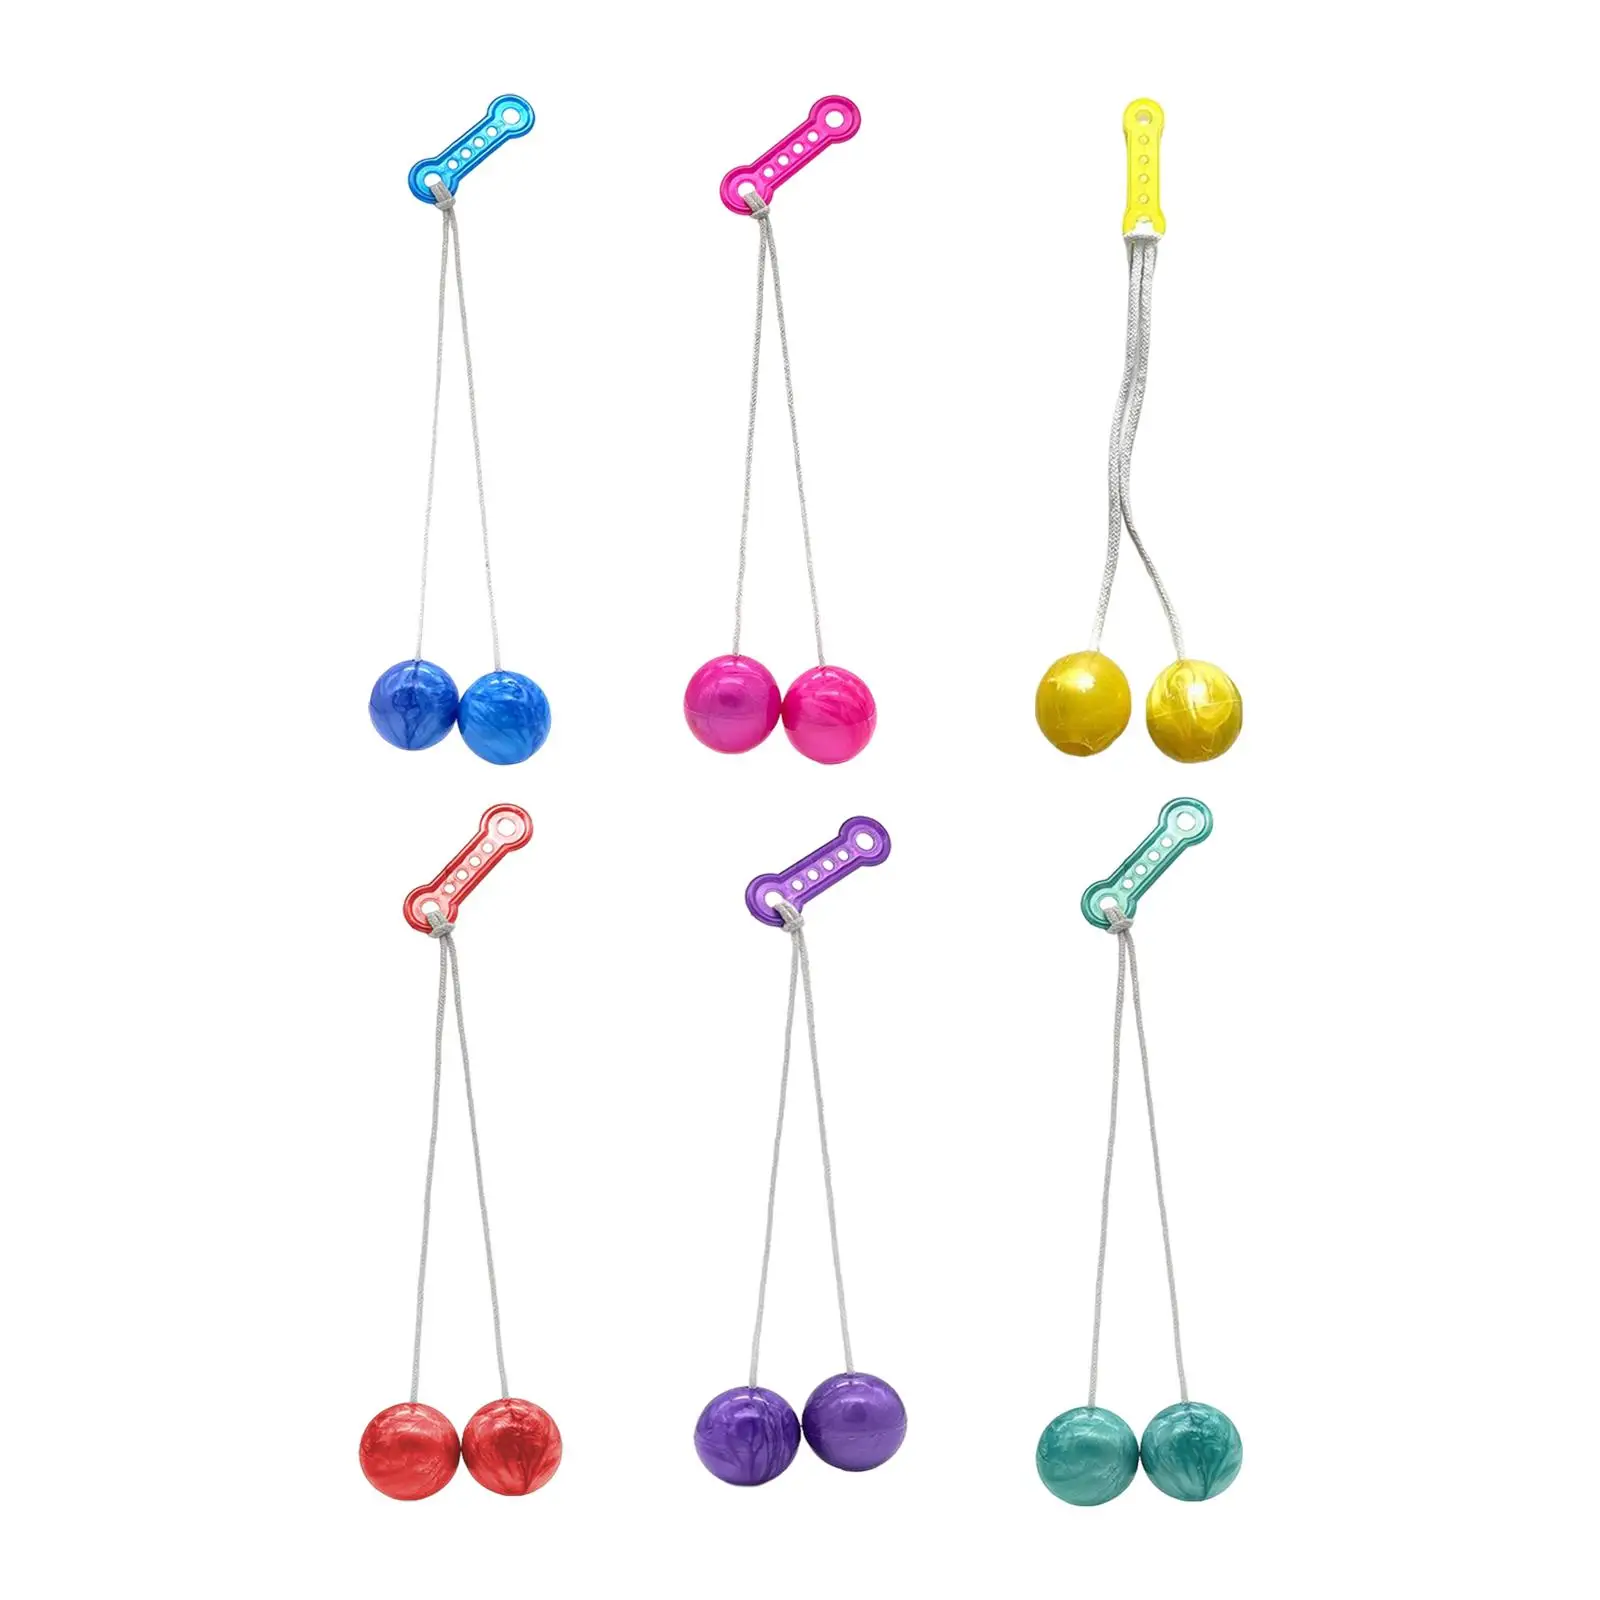 

Novelty Swing up Balls On A String Sensory Toy Hands On Abilities Fine Motor Skills for Holiday Goodie Bag Toys Indoor Outdoor